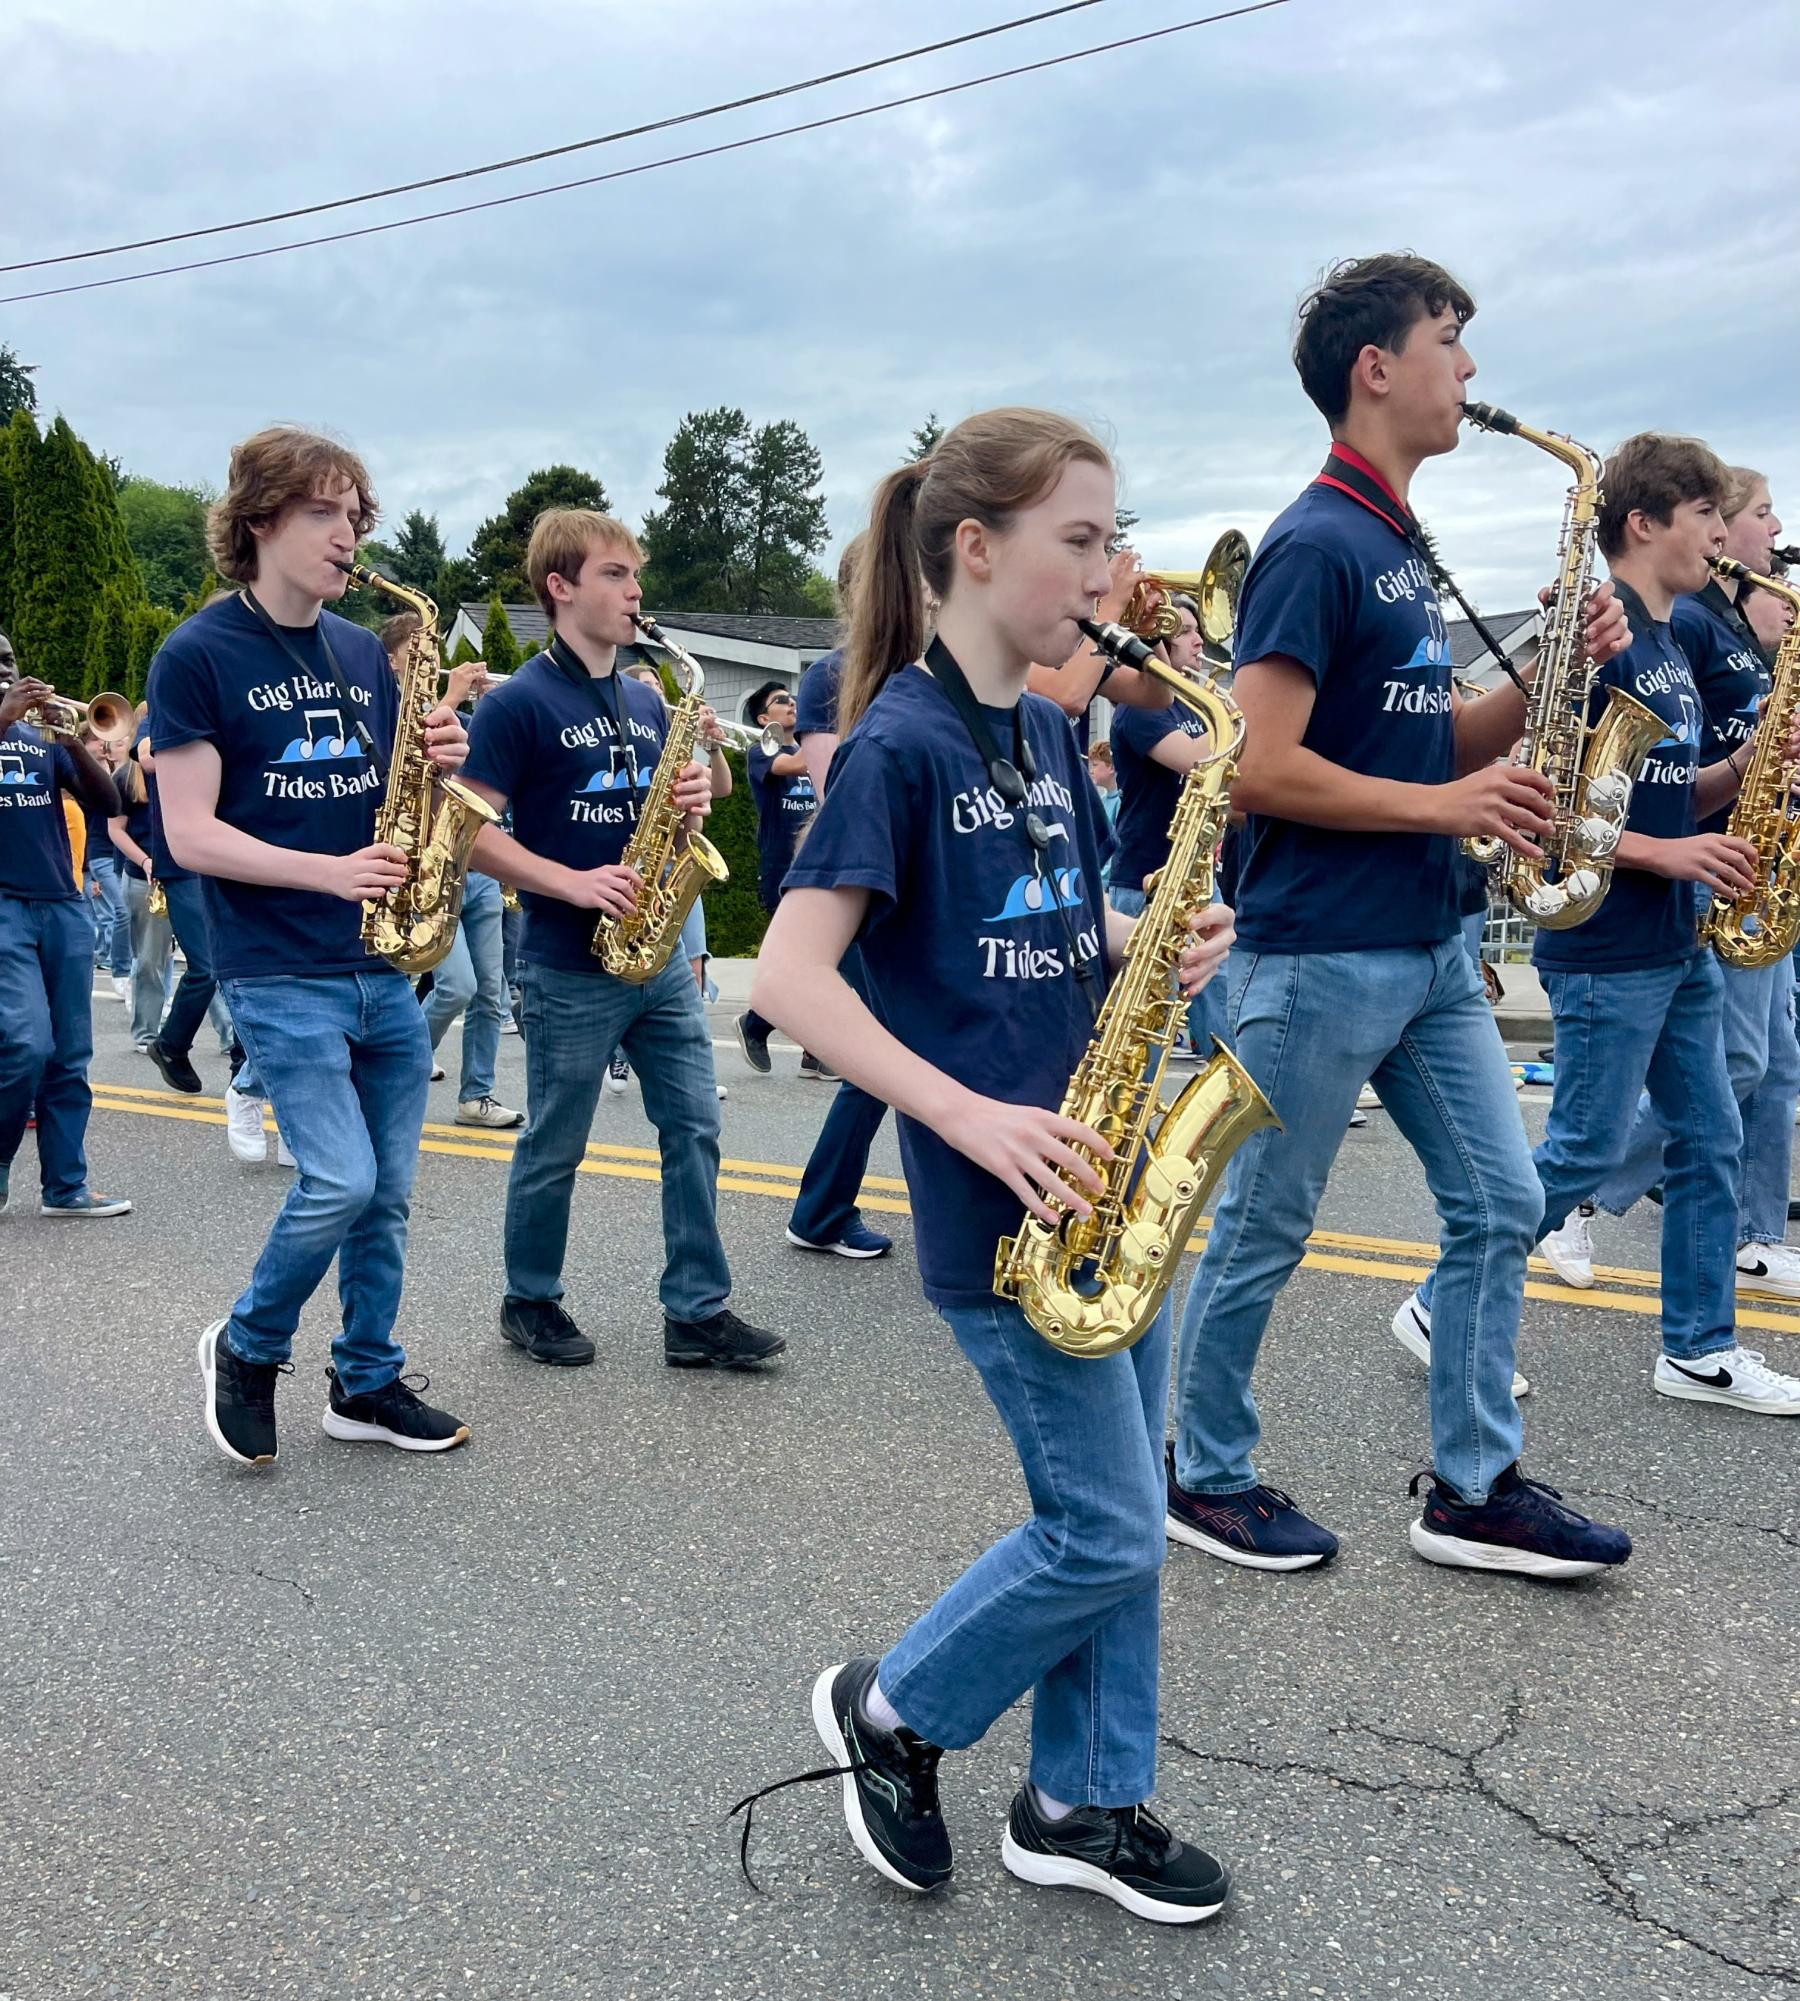 Gig Harbor High School Band marches in the parade